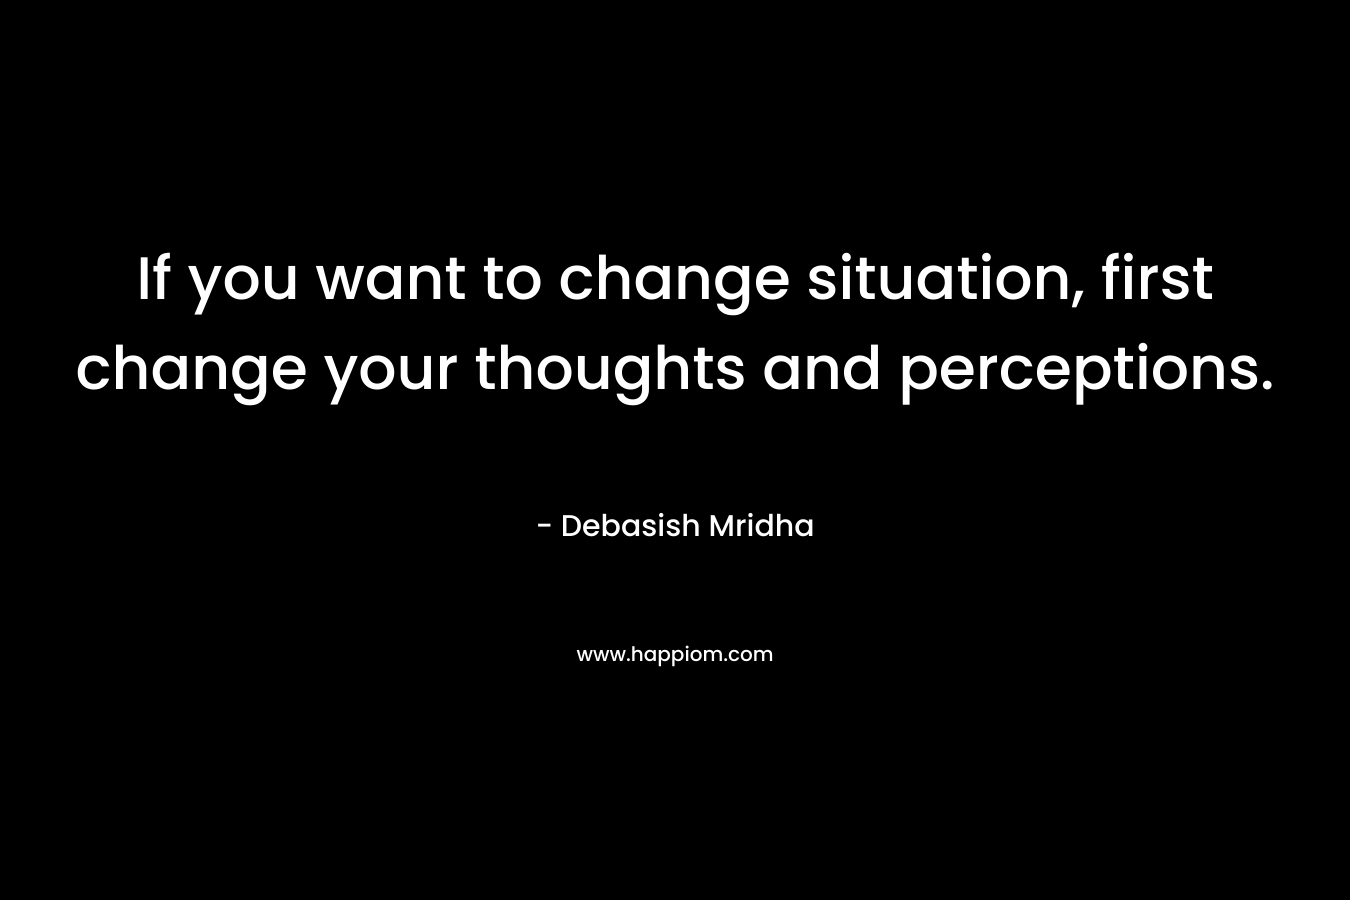 If you want to change situation, first change your thoughts and perceptions.